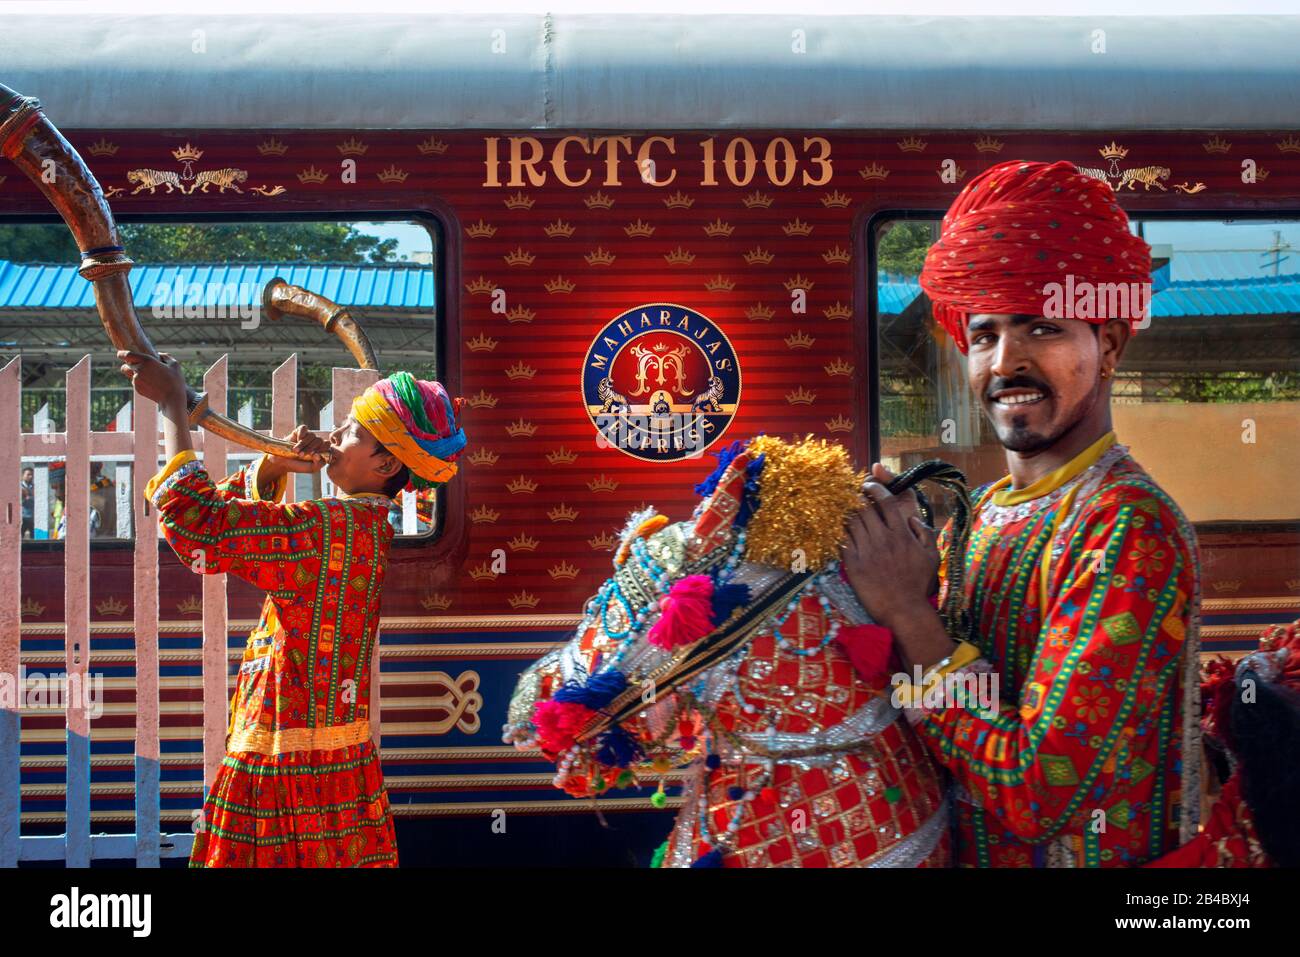 Jaipur folk music and dances wellcome to Luxury train Maharajas express train in Jaipur Junction Railway Station Rajasthan India. Stock Photo